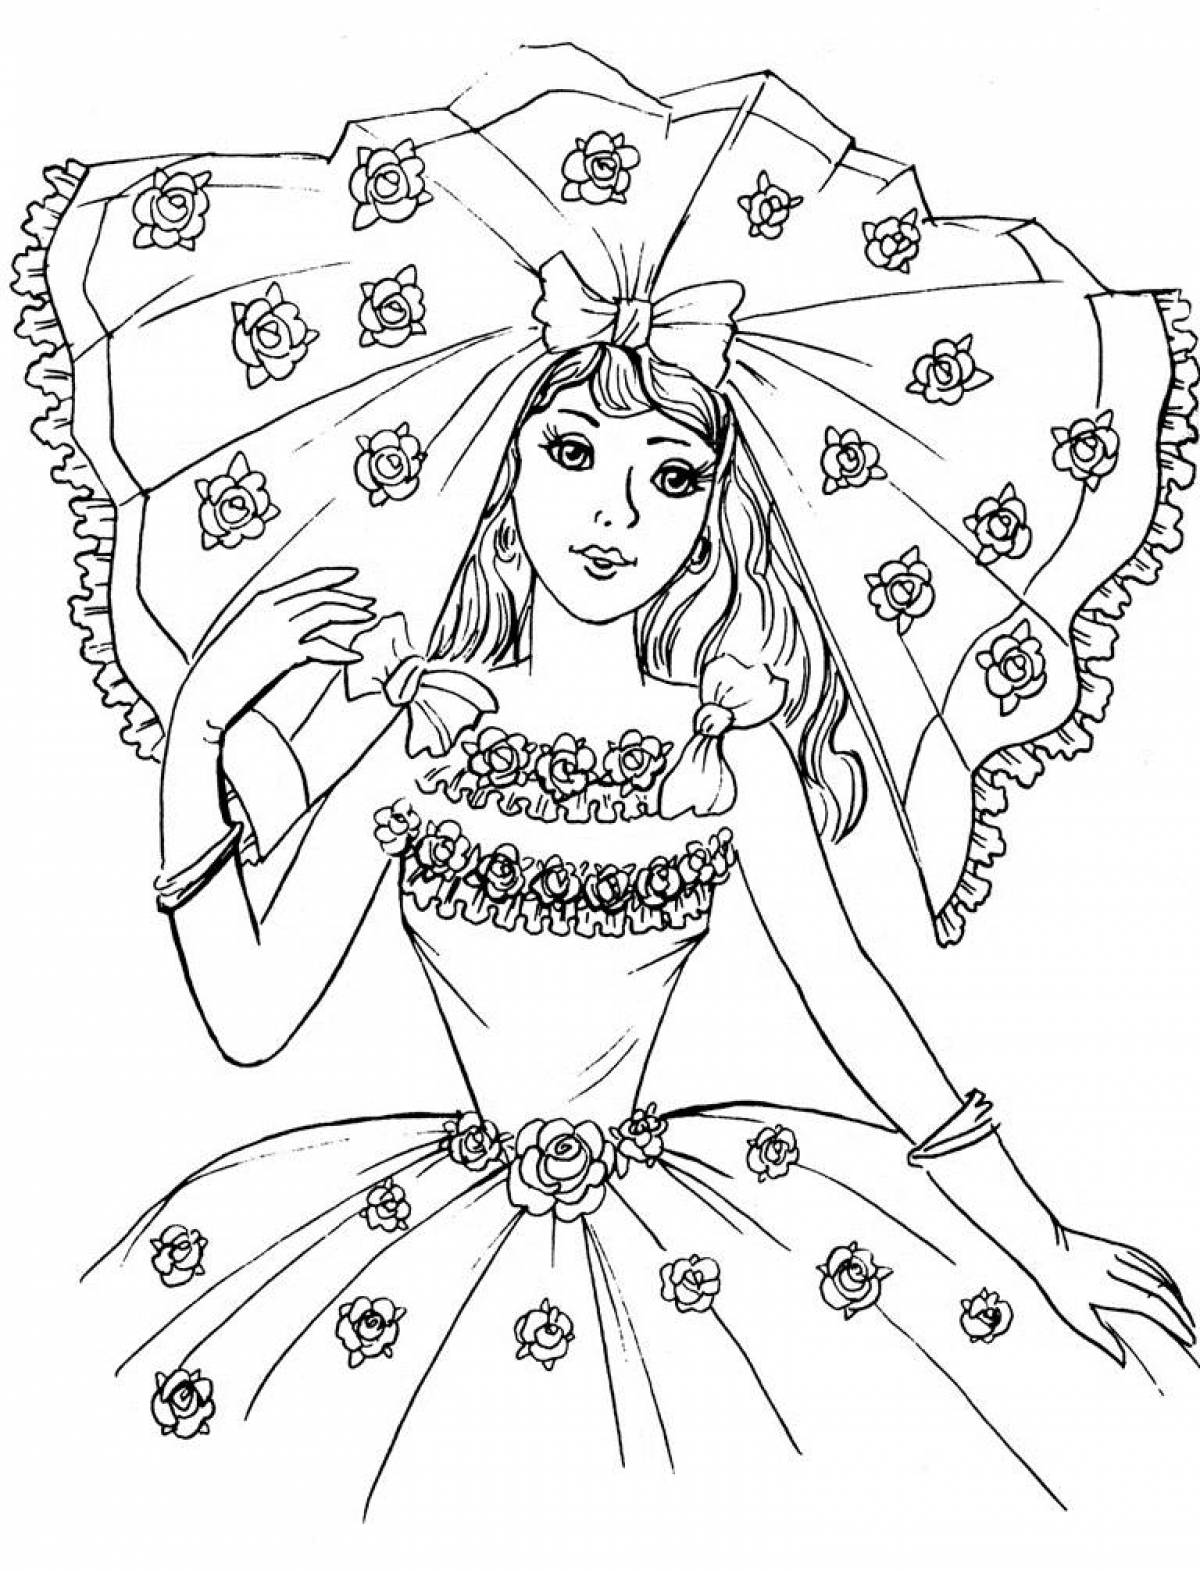 Delightful coloring book for girls 9-10 years old